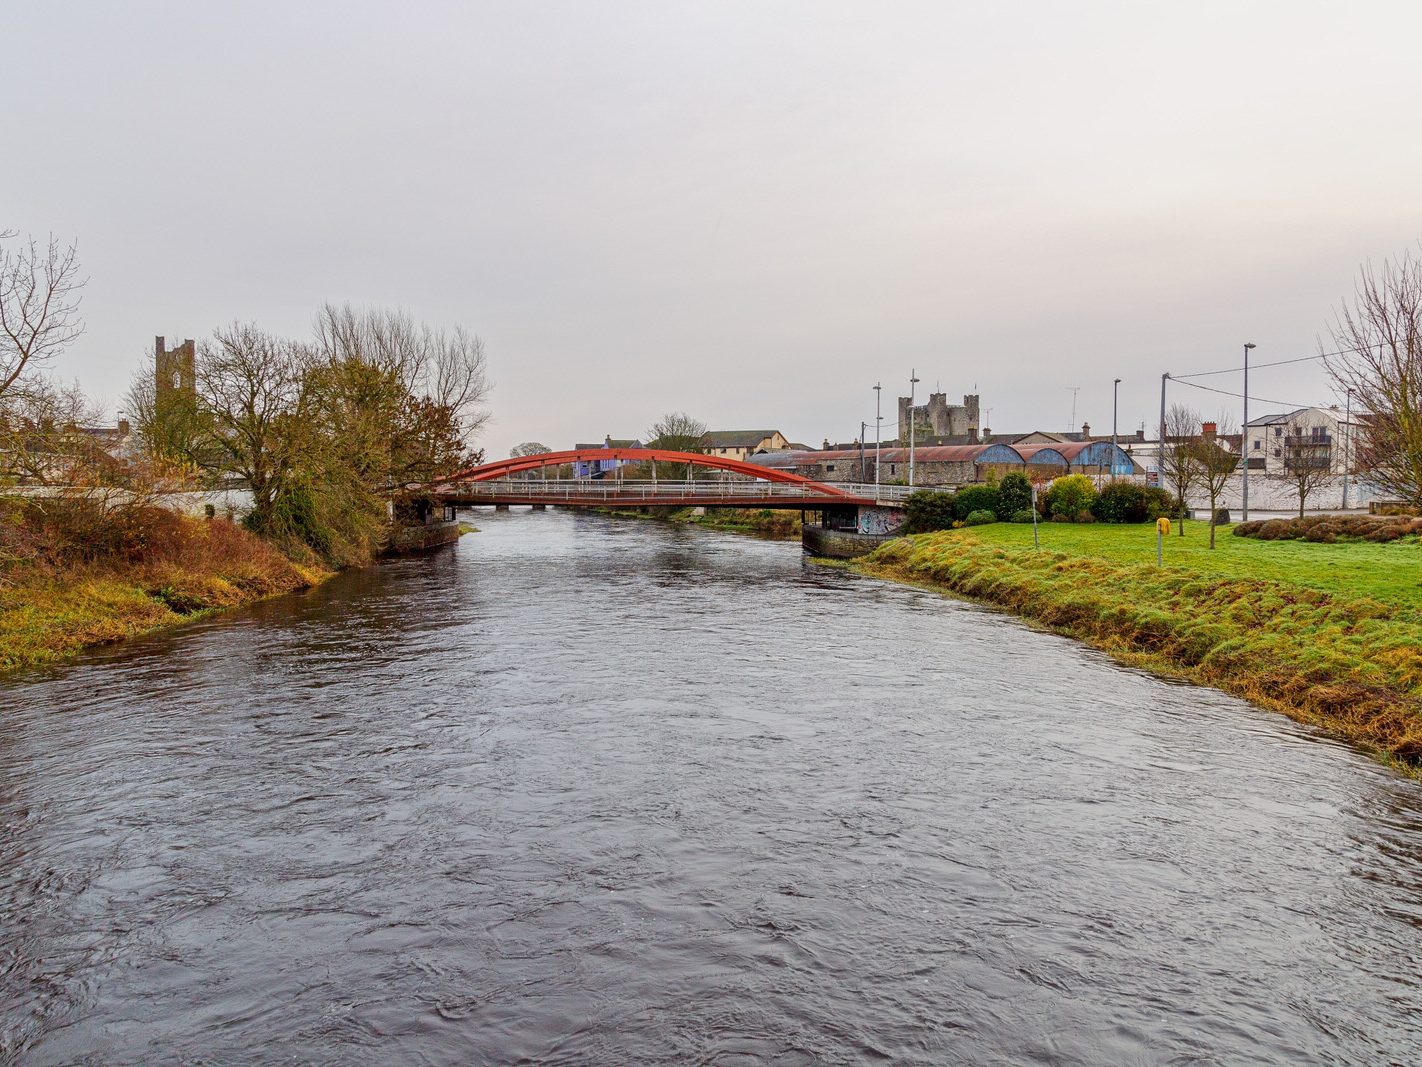 WATERGATE STREET AND WATERGATE BRIDGE [THE TOWN OF TRIM IN COUNTY MEATH]-226464-1